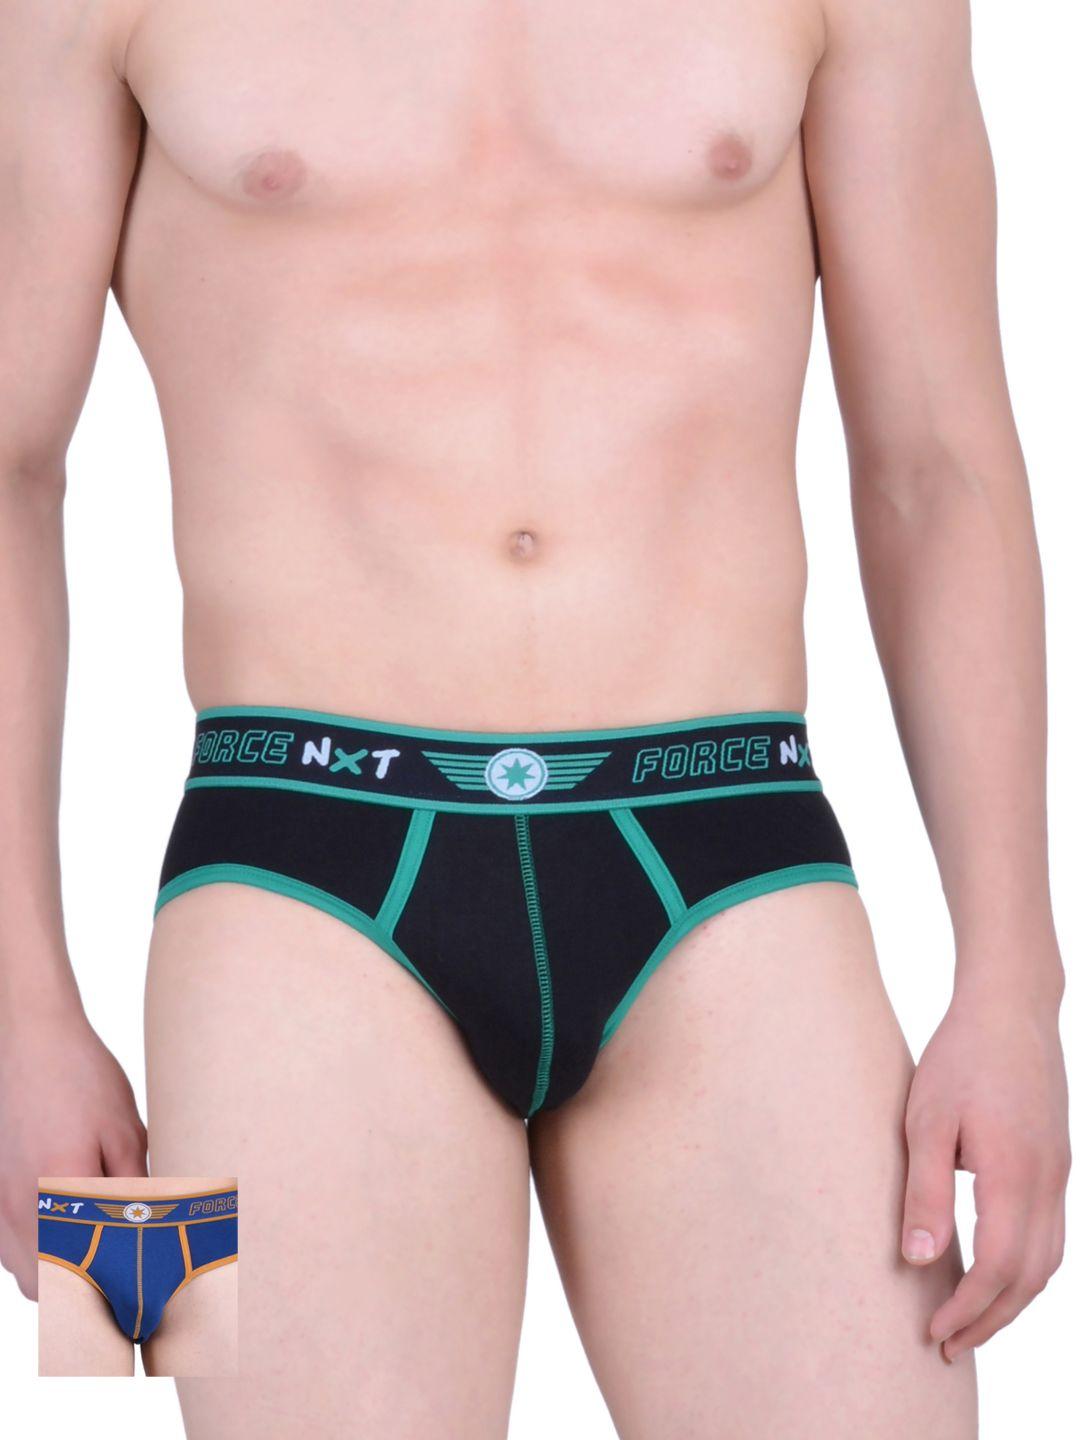 force nxt men pack of 2 printed assorted briefs mnfl-32-po2